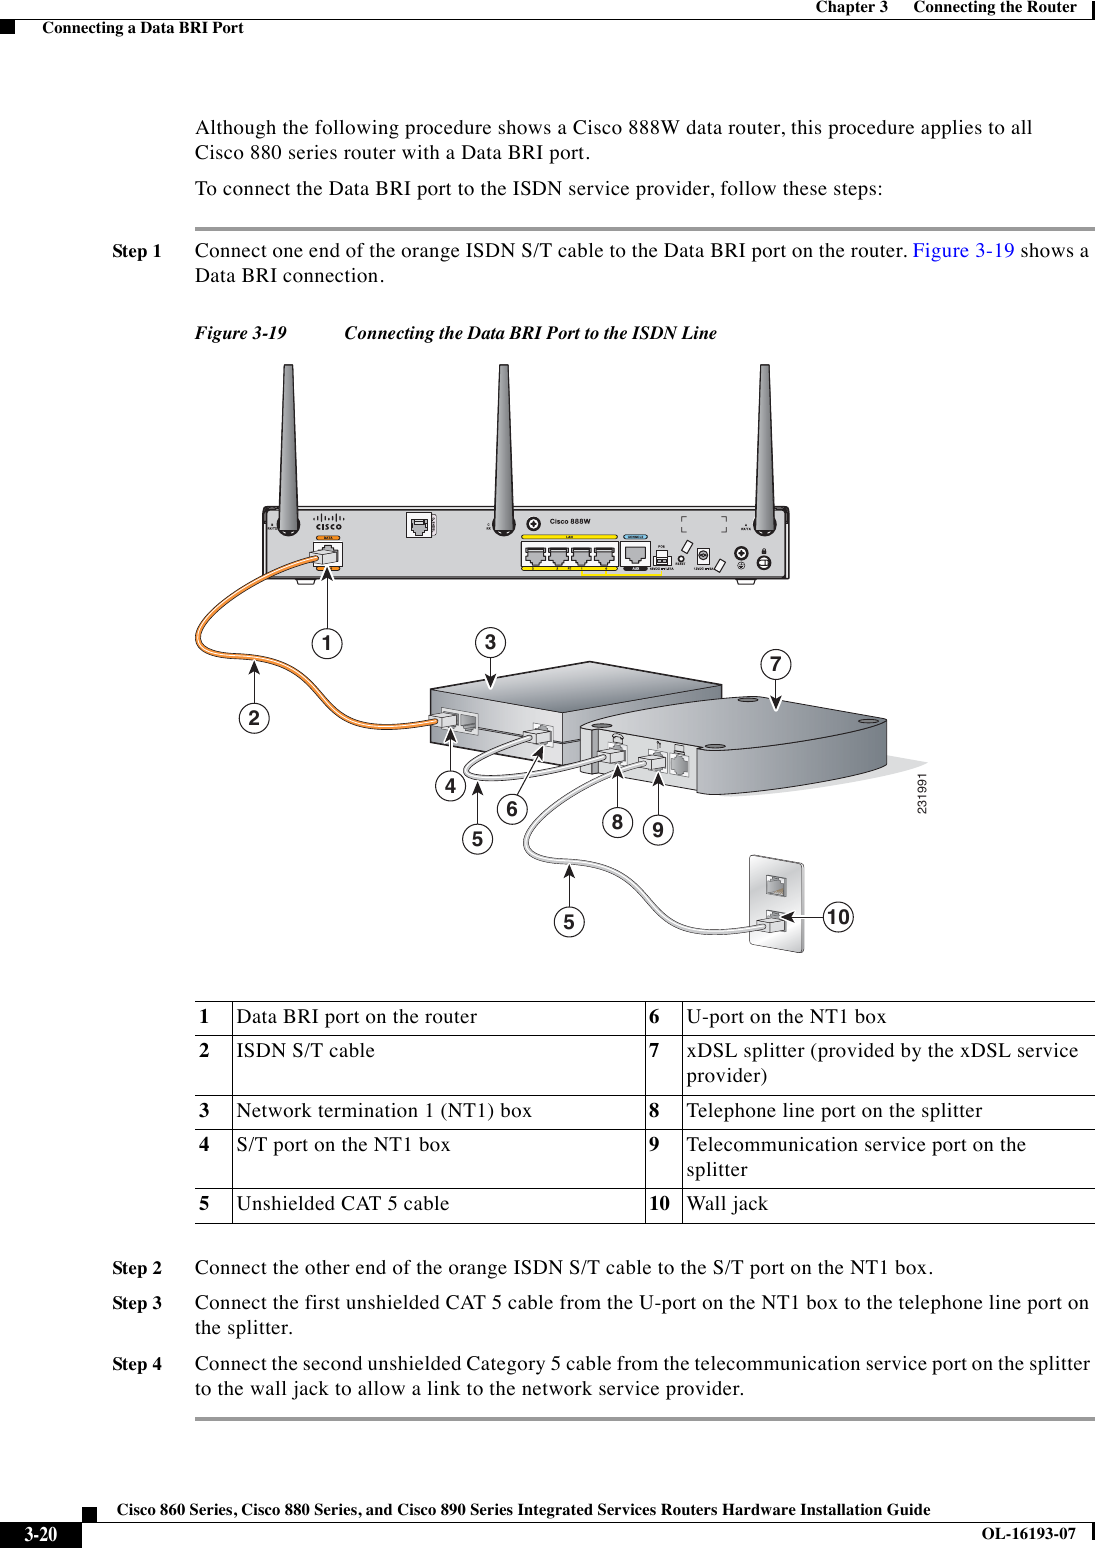  3-20Cisco 860 Series, Cisco 880 Series, and Cisco 890 Series Integrated Services Routers Hardware Installation GuideOL-16193-07Chapter 3      Connecting the Router  Connecting a Data BRI PortAlthough the following procedure shows a Cisco 888W data router, this procedure applies to all Cisco 880 series router with a Data BRI port.To connect the Data BRI port to the ISDN service provider, follow these steps:Step 1Connect one end of the orange ISDN S/T cable to the Data BRI port on the router. Figure 3-19 shows a Data BRI connection.Figure 3-19 Connecting the Data BRI Port to the ISDN LineStep 2Connect the other end of the orange ISDN S/T cable to the S/T port on the NT1 box.Step 3Connect the first unshielded CAT 5 cable from the U-port on the NT1 box to the telephone line port on the splitter. Step 4Connect the second unshielded Category 5 cable from the telecommunication service port on the splitter to the wall jack to allow a link to the network service provider.1Data BRI port on the router 6U-port on the NT1 box2ISDN S/T cable 7xDSL splitter (provided by the xDSL service provider)3Network termination 1 (NT1) box  8Telephone line port on the splitter4S/T port on the NT1 box 9Telecommunication service port on the splitter5Unshielded CAT 5 cable 10 Wall jack231991314210698755